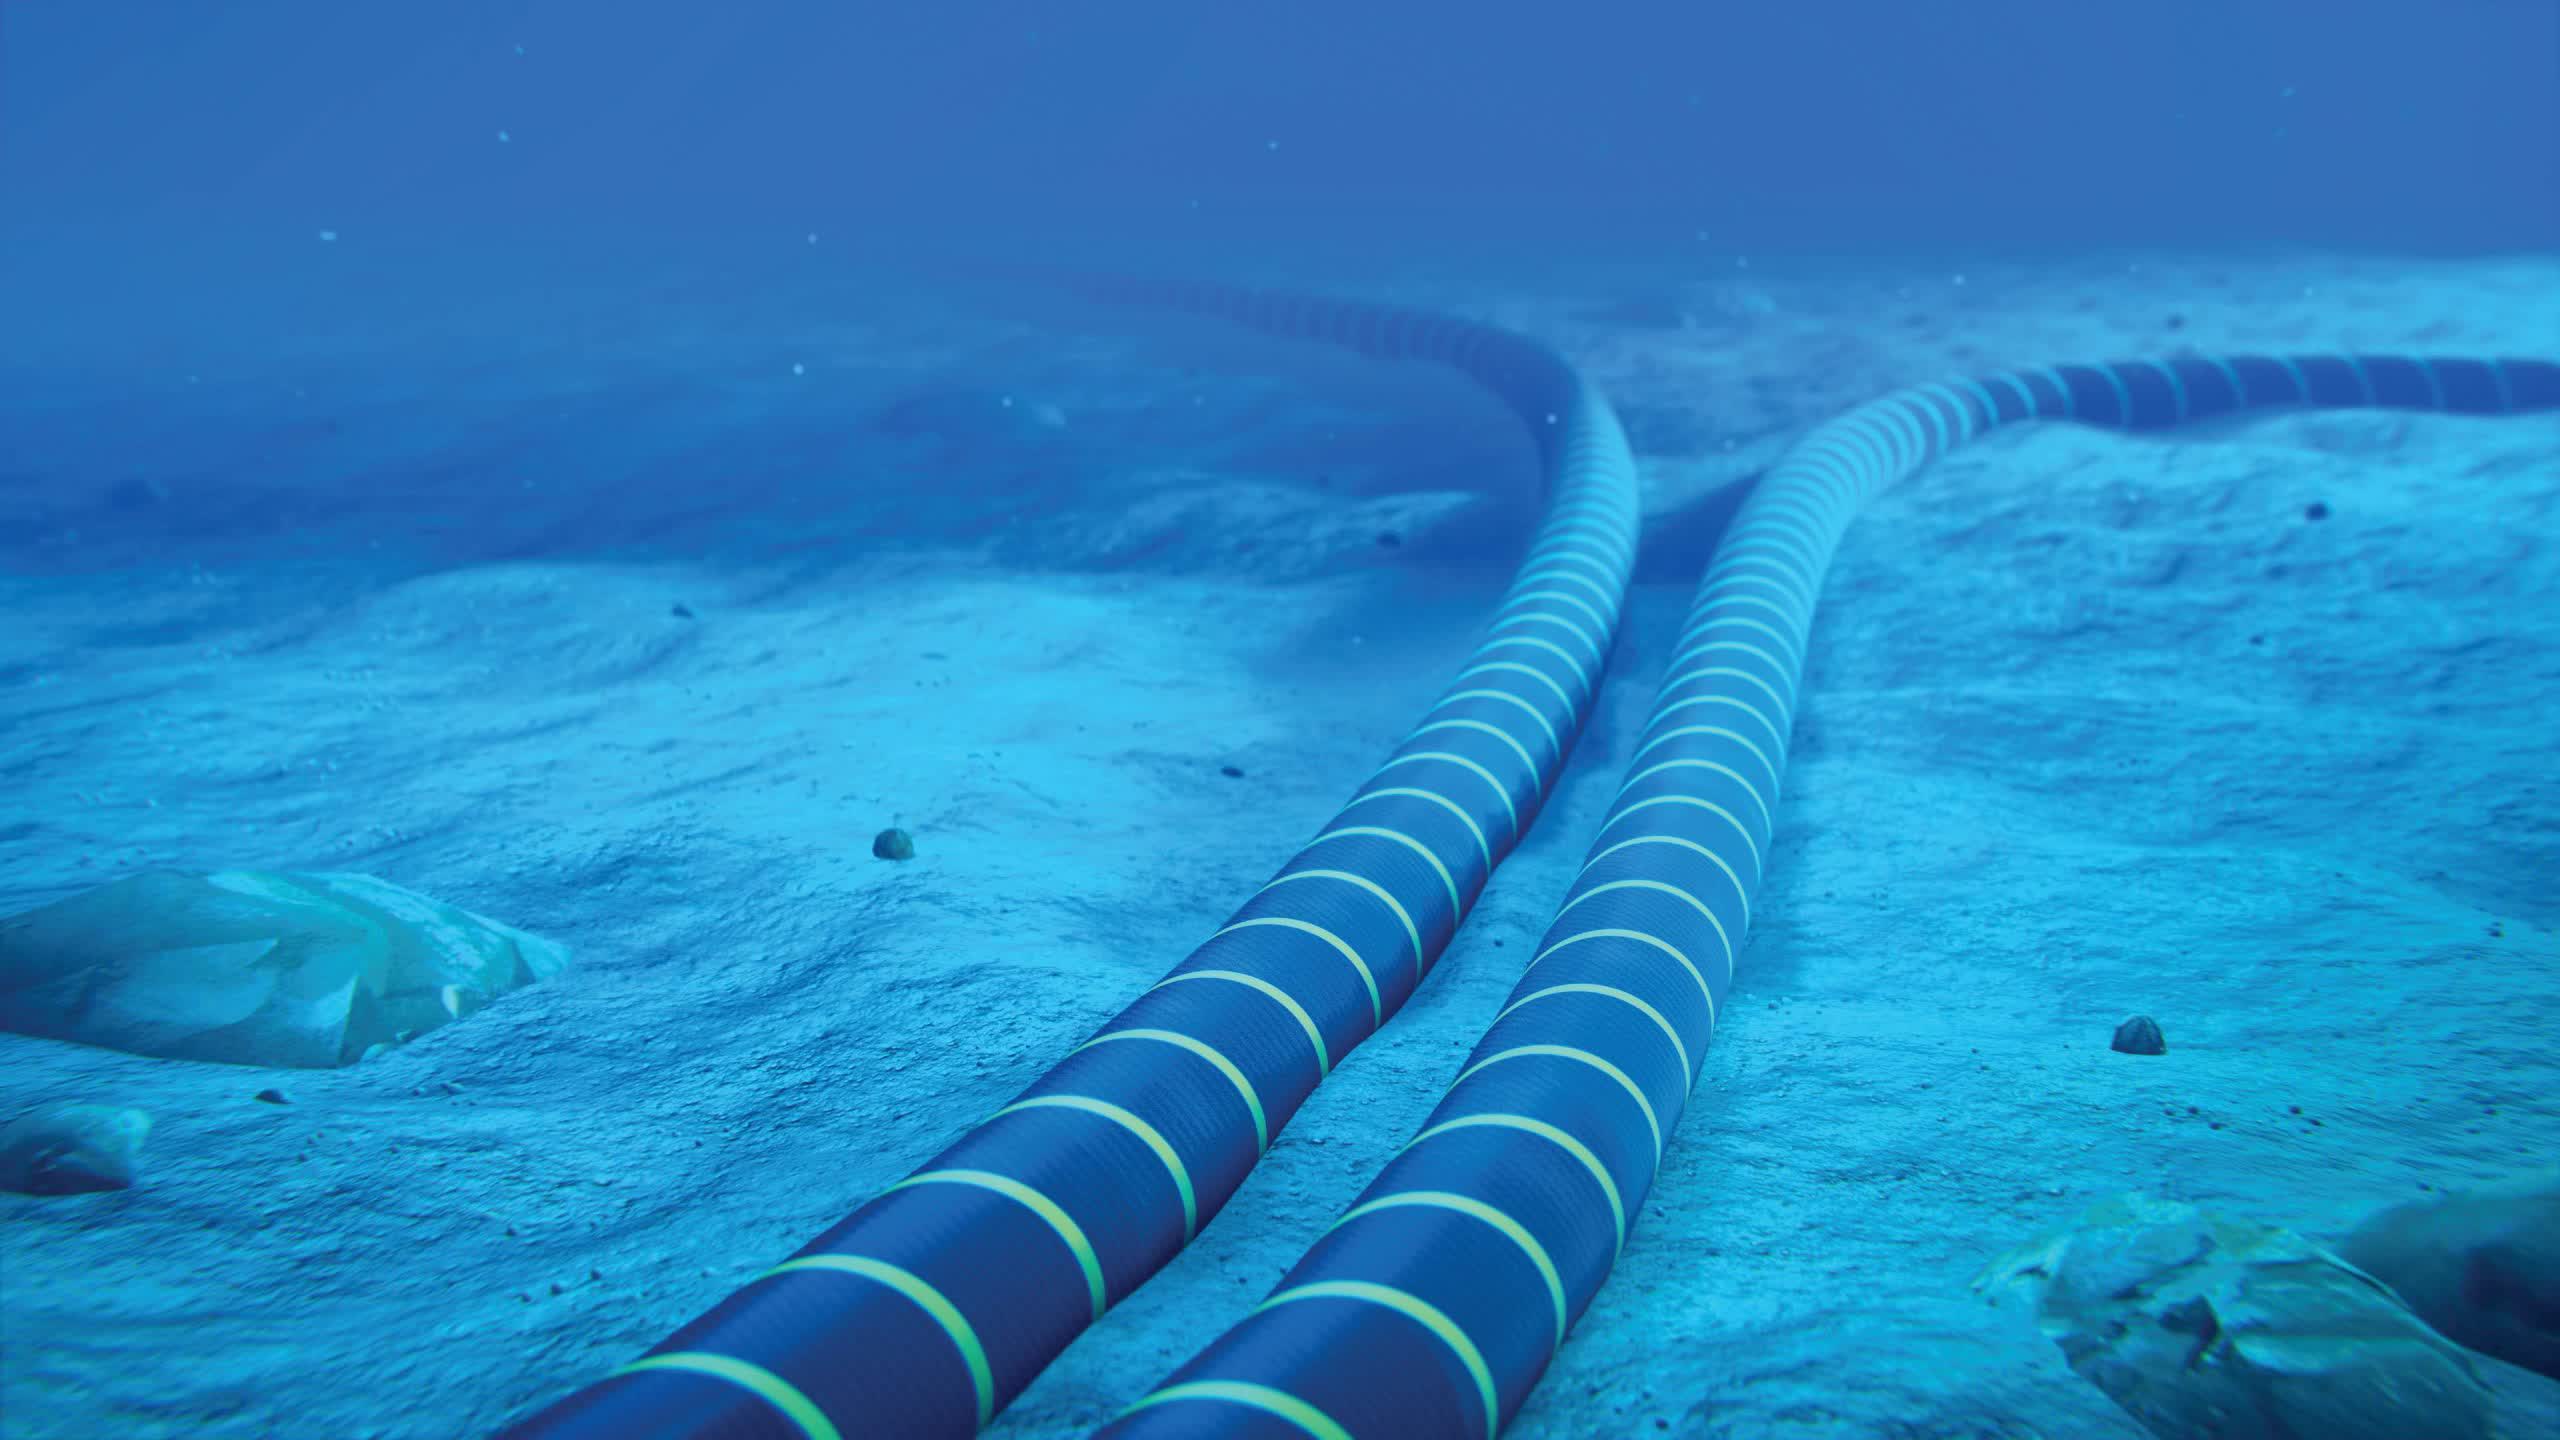 Singapore to invest billions in new submarine cable facilities